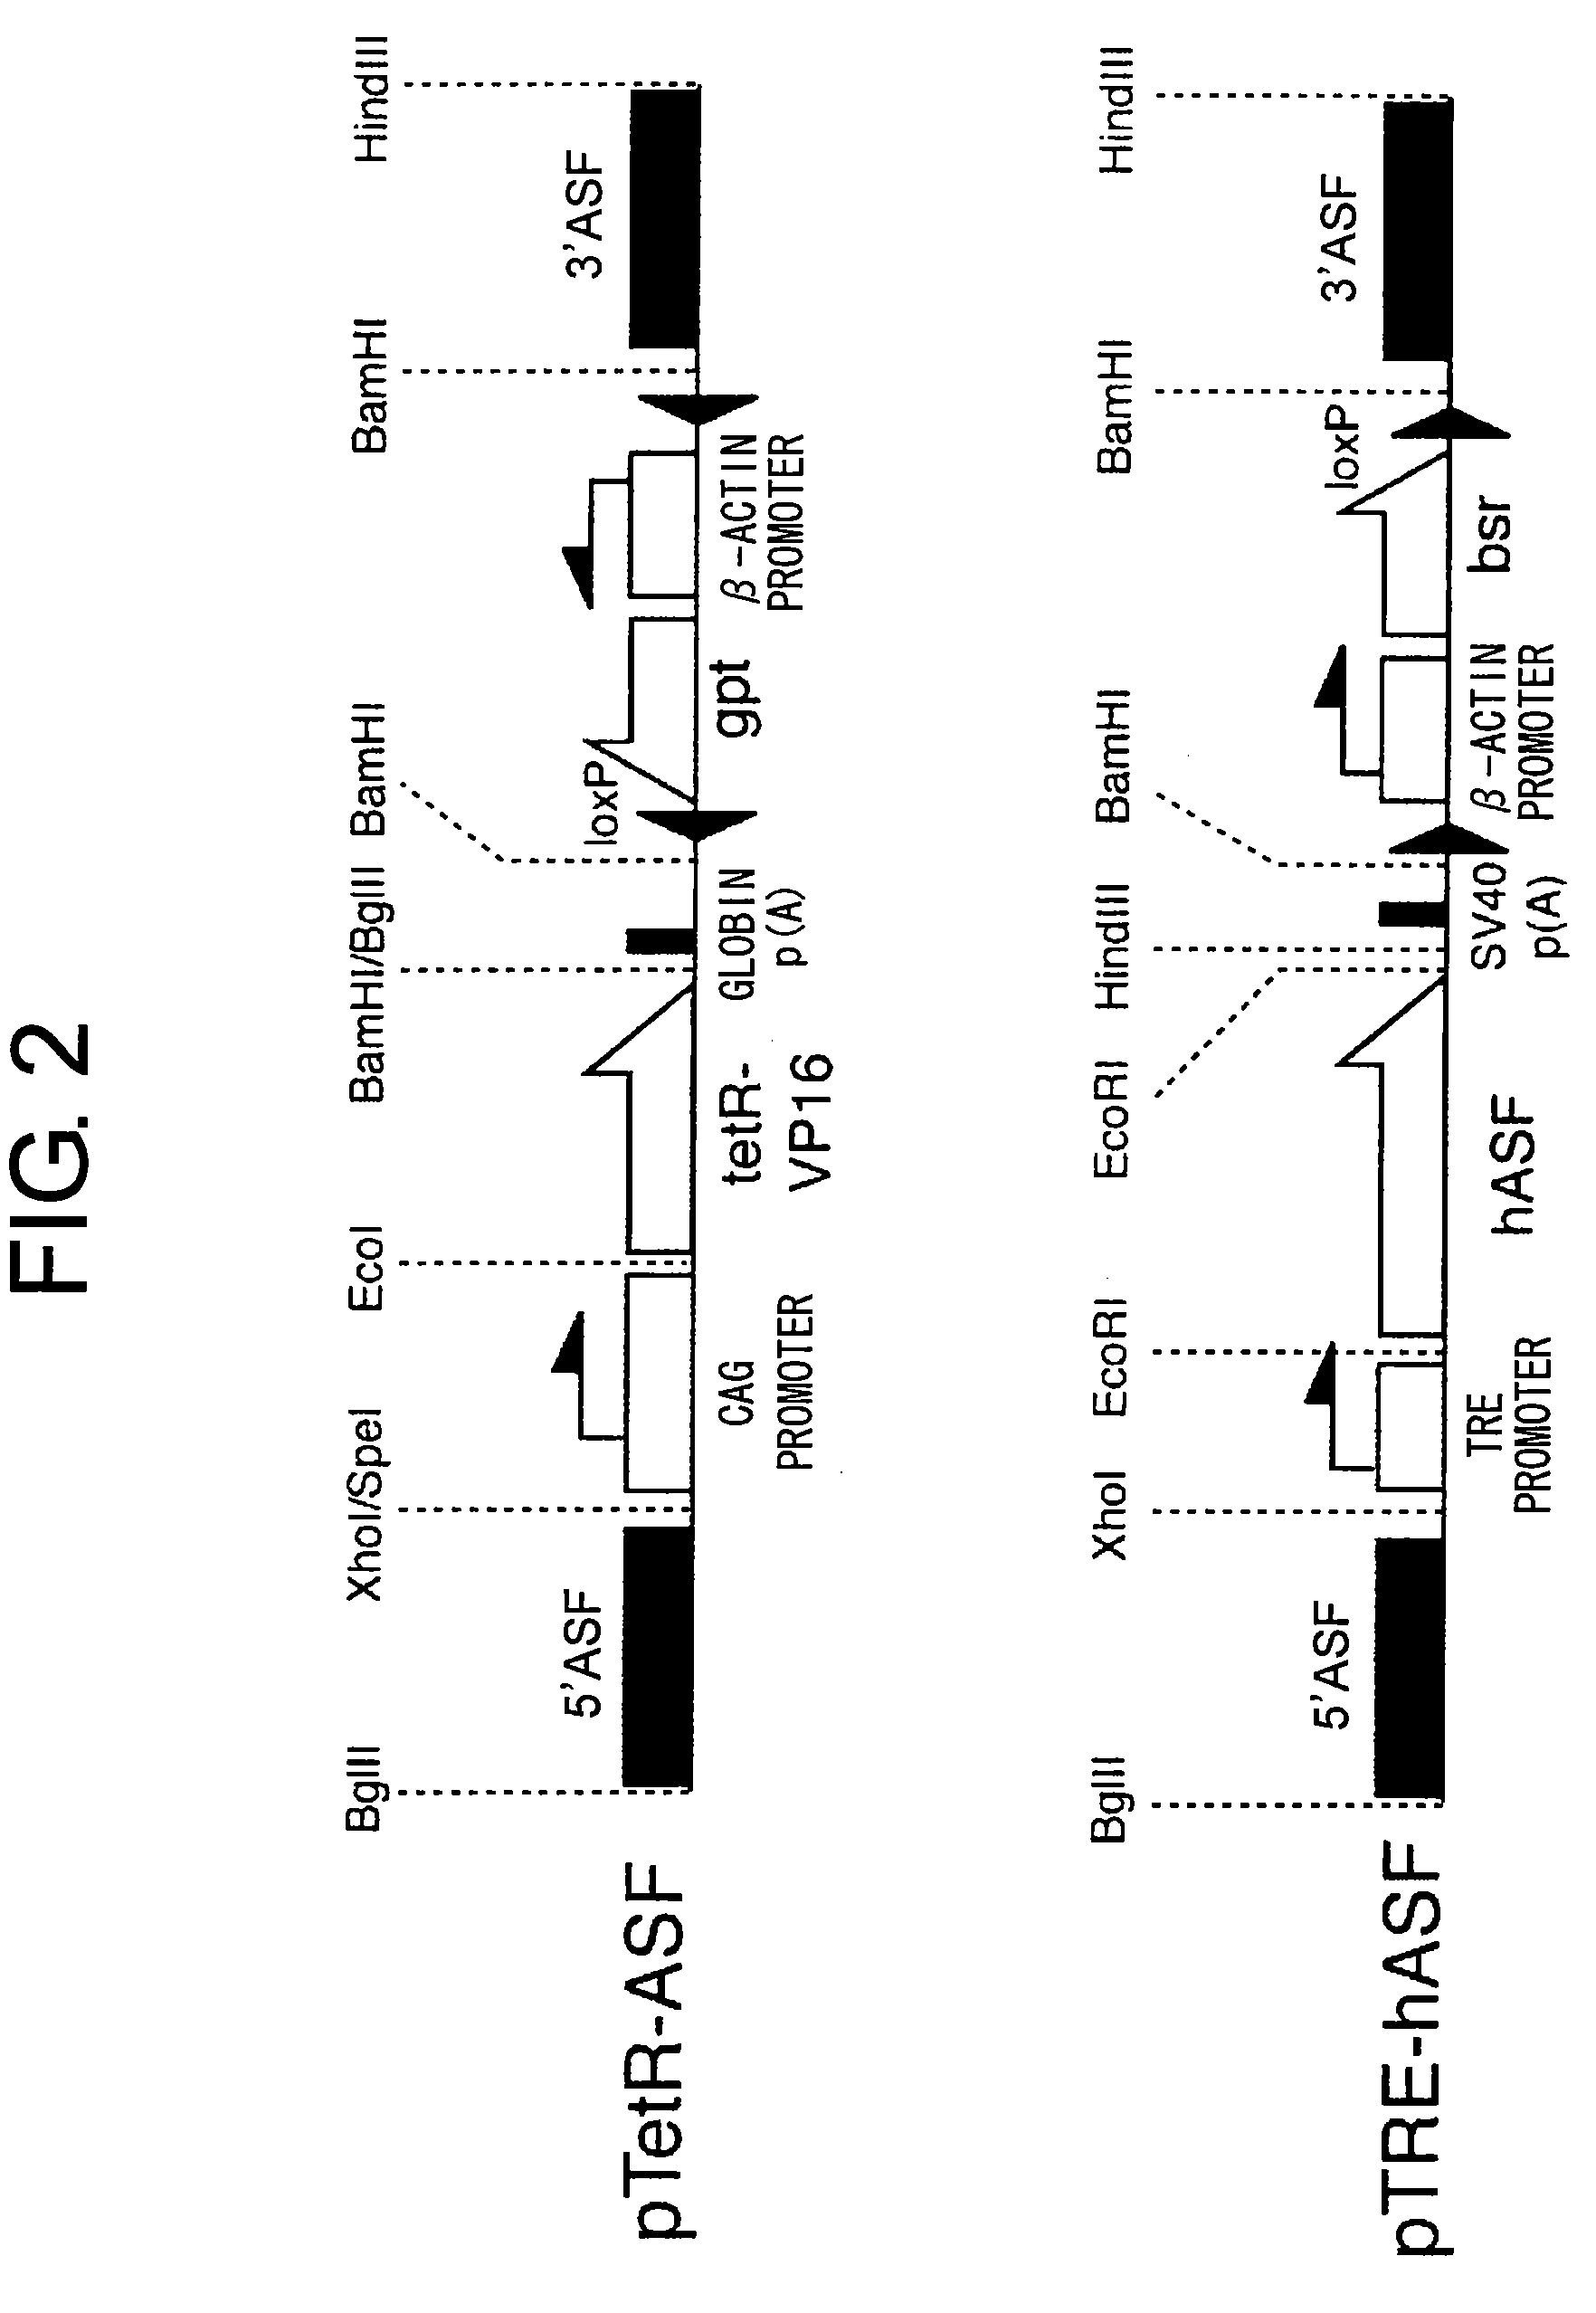 Methods for Specifically Selecting Antibody-Producing Cells